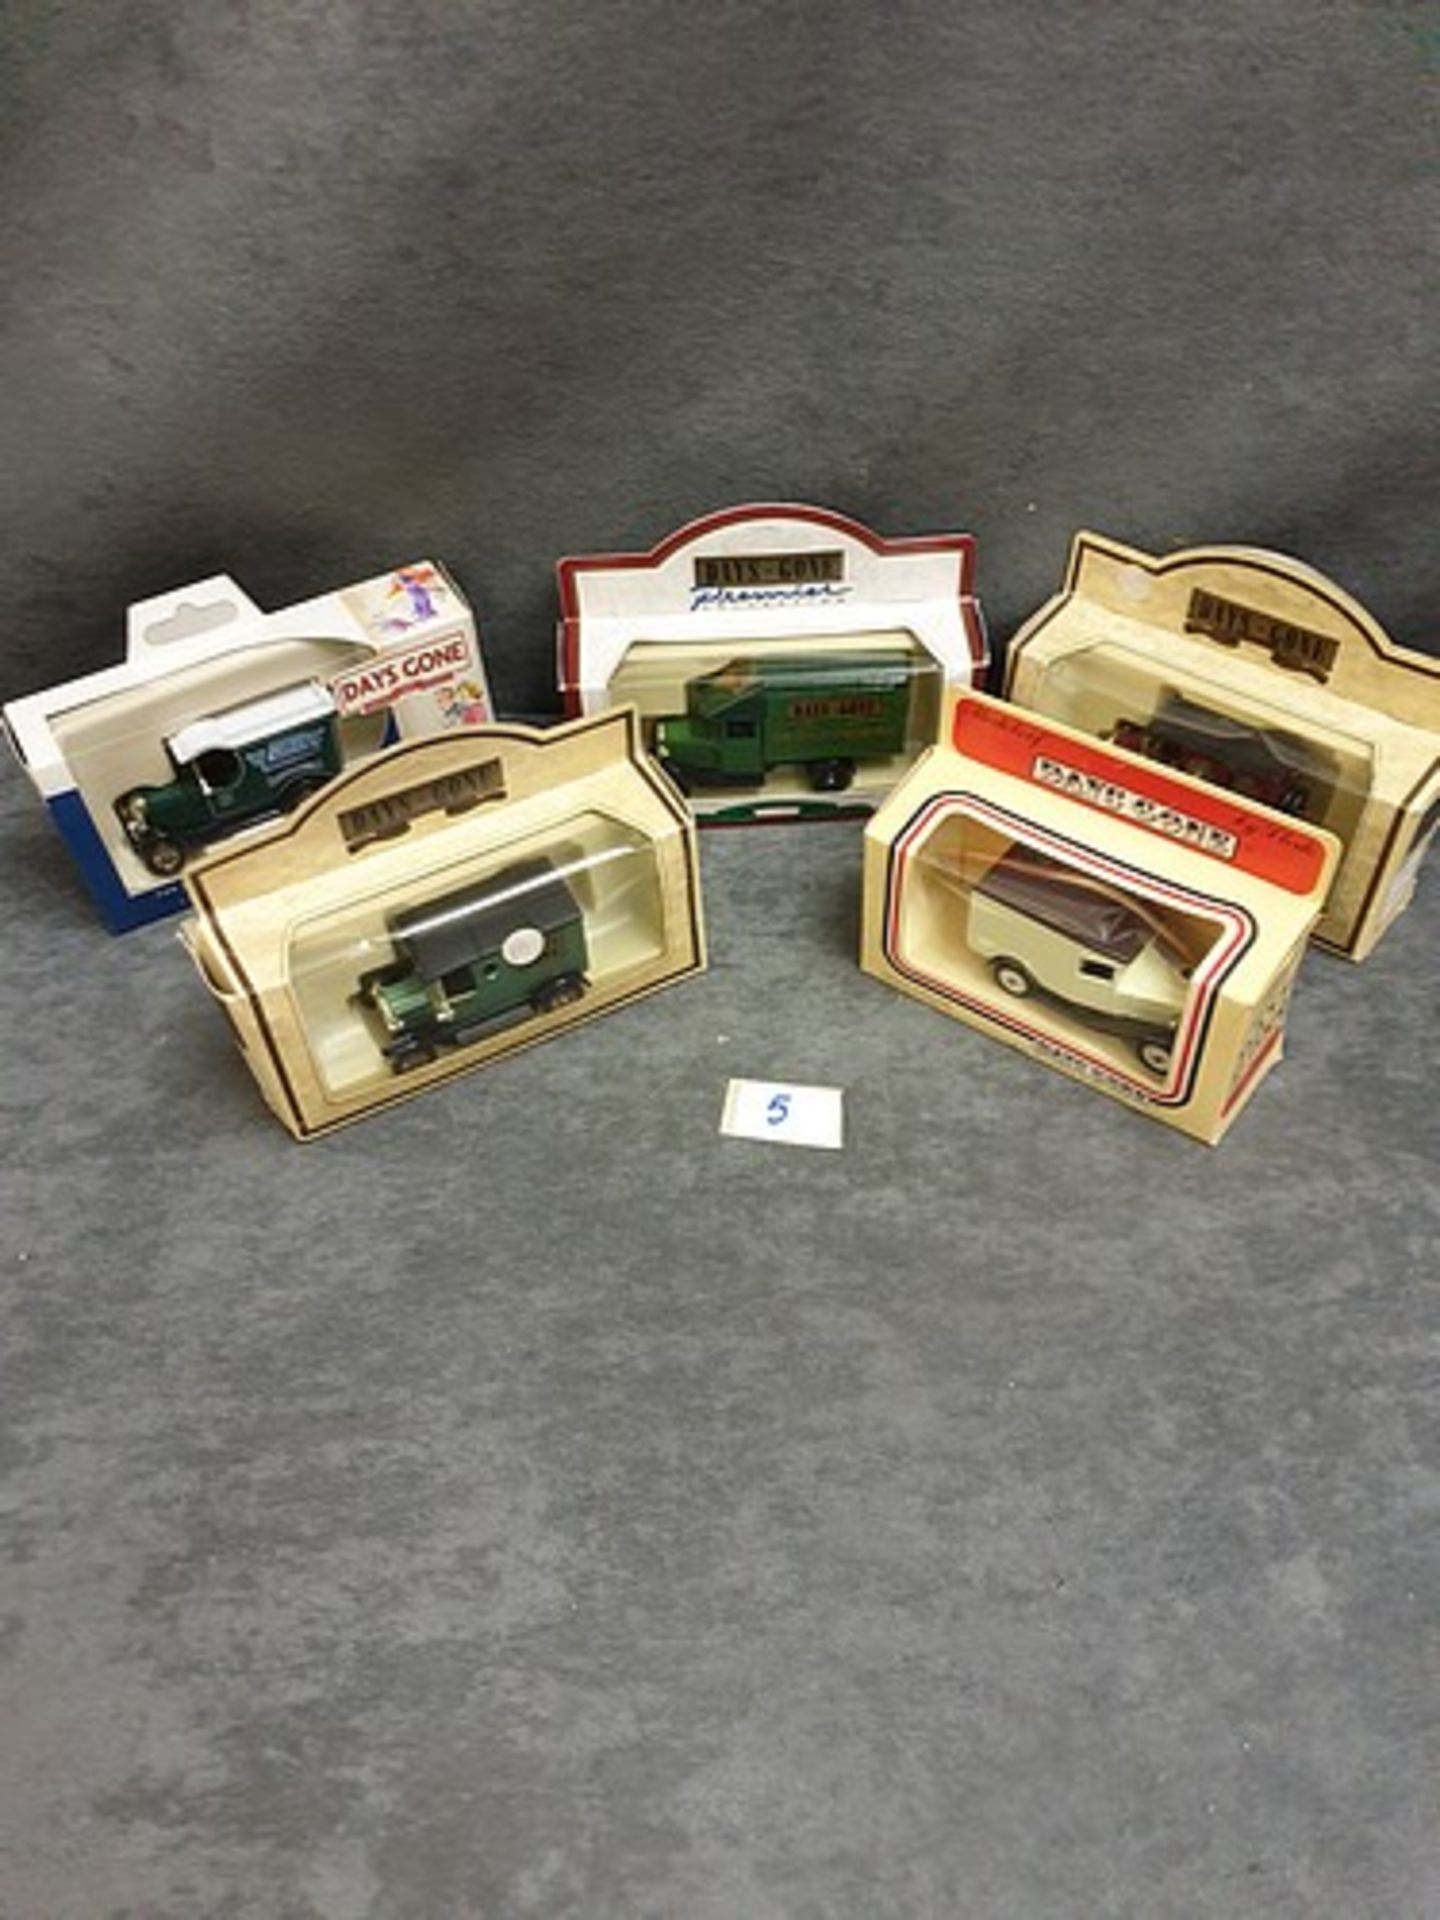 5x Days Gone Diecast Vehicles Individually Boxed Advertising Grand Hotel Days |Gone Lledo Plain.